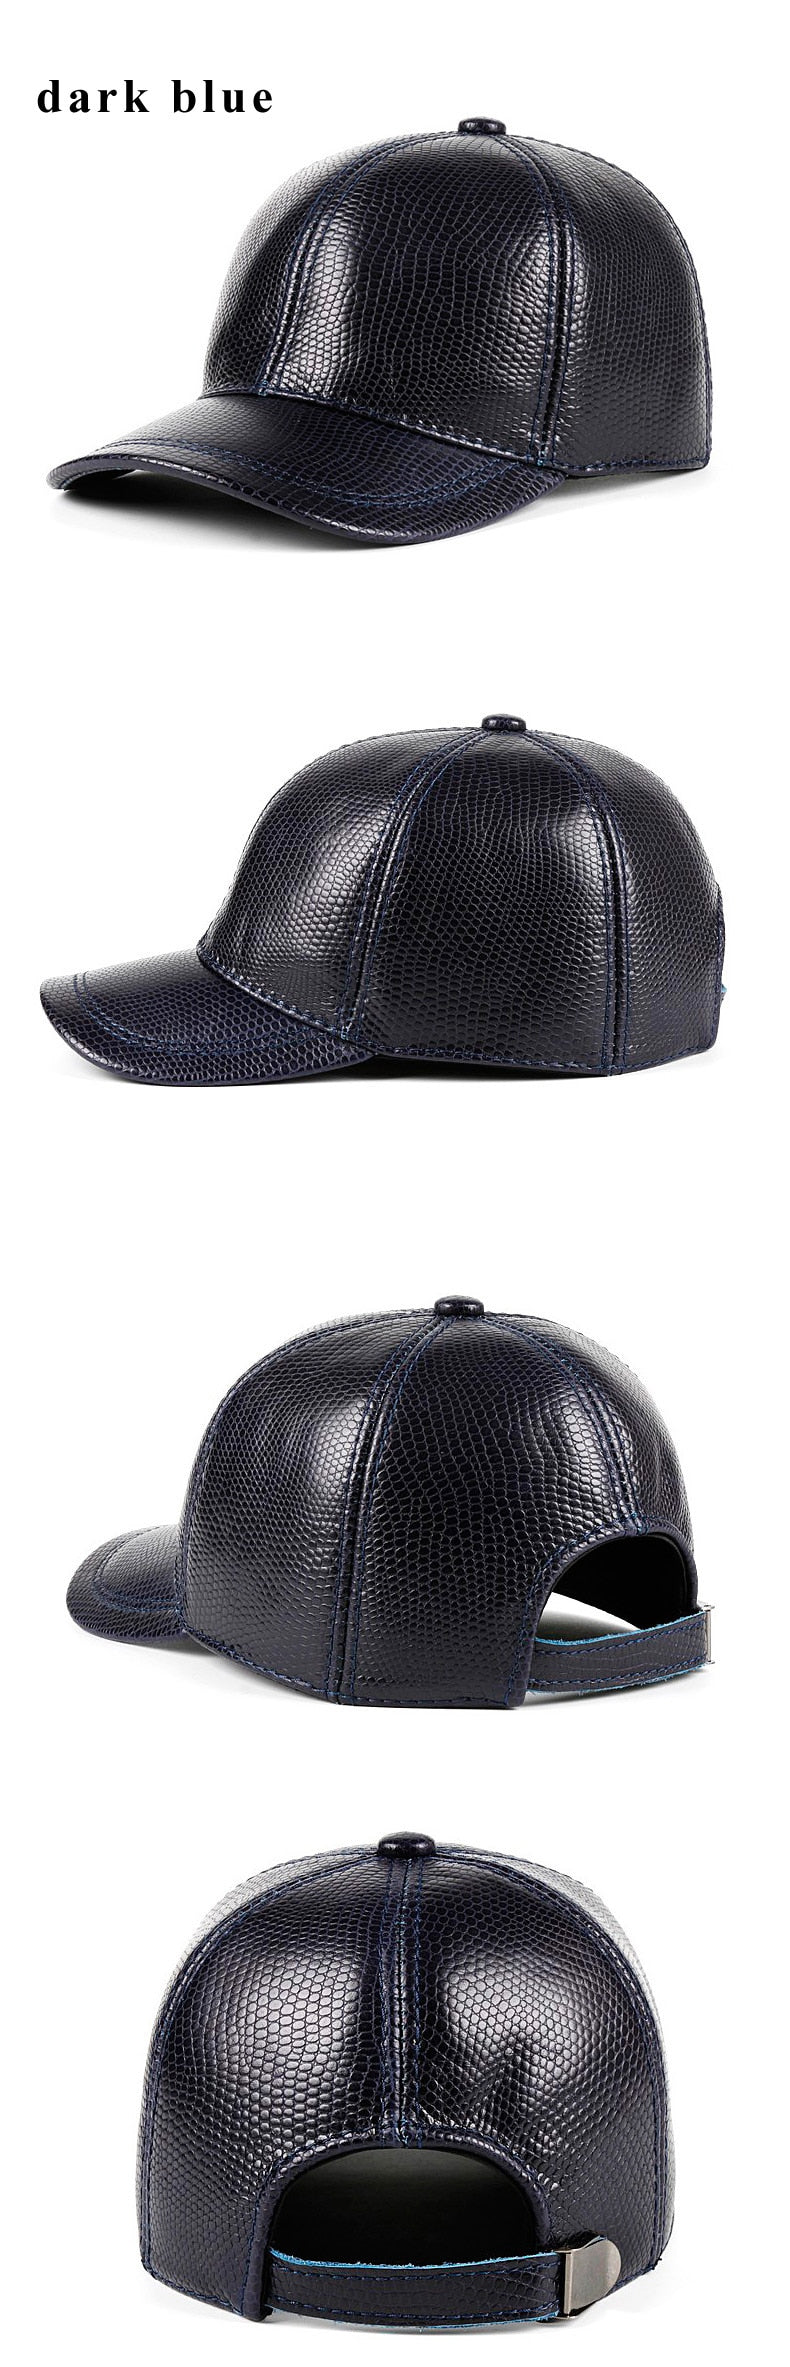 Winter Leather Hats